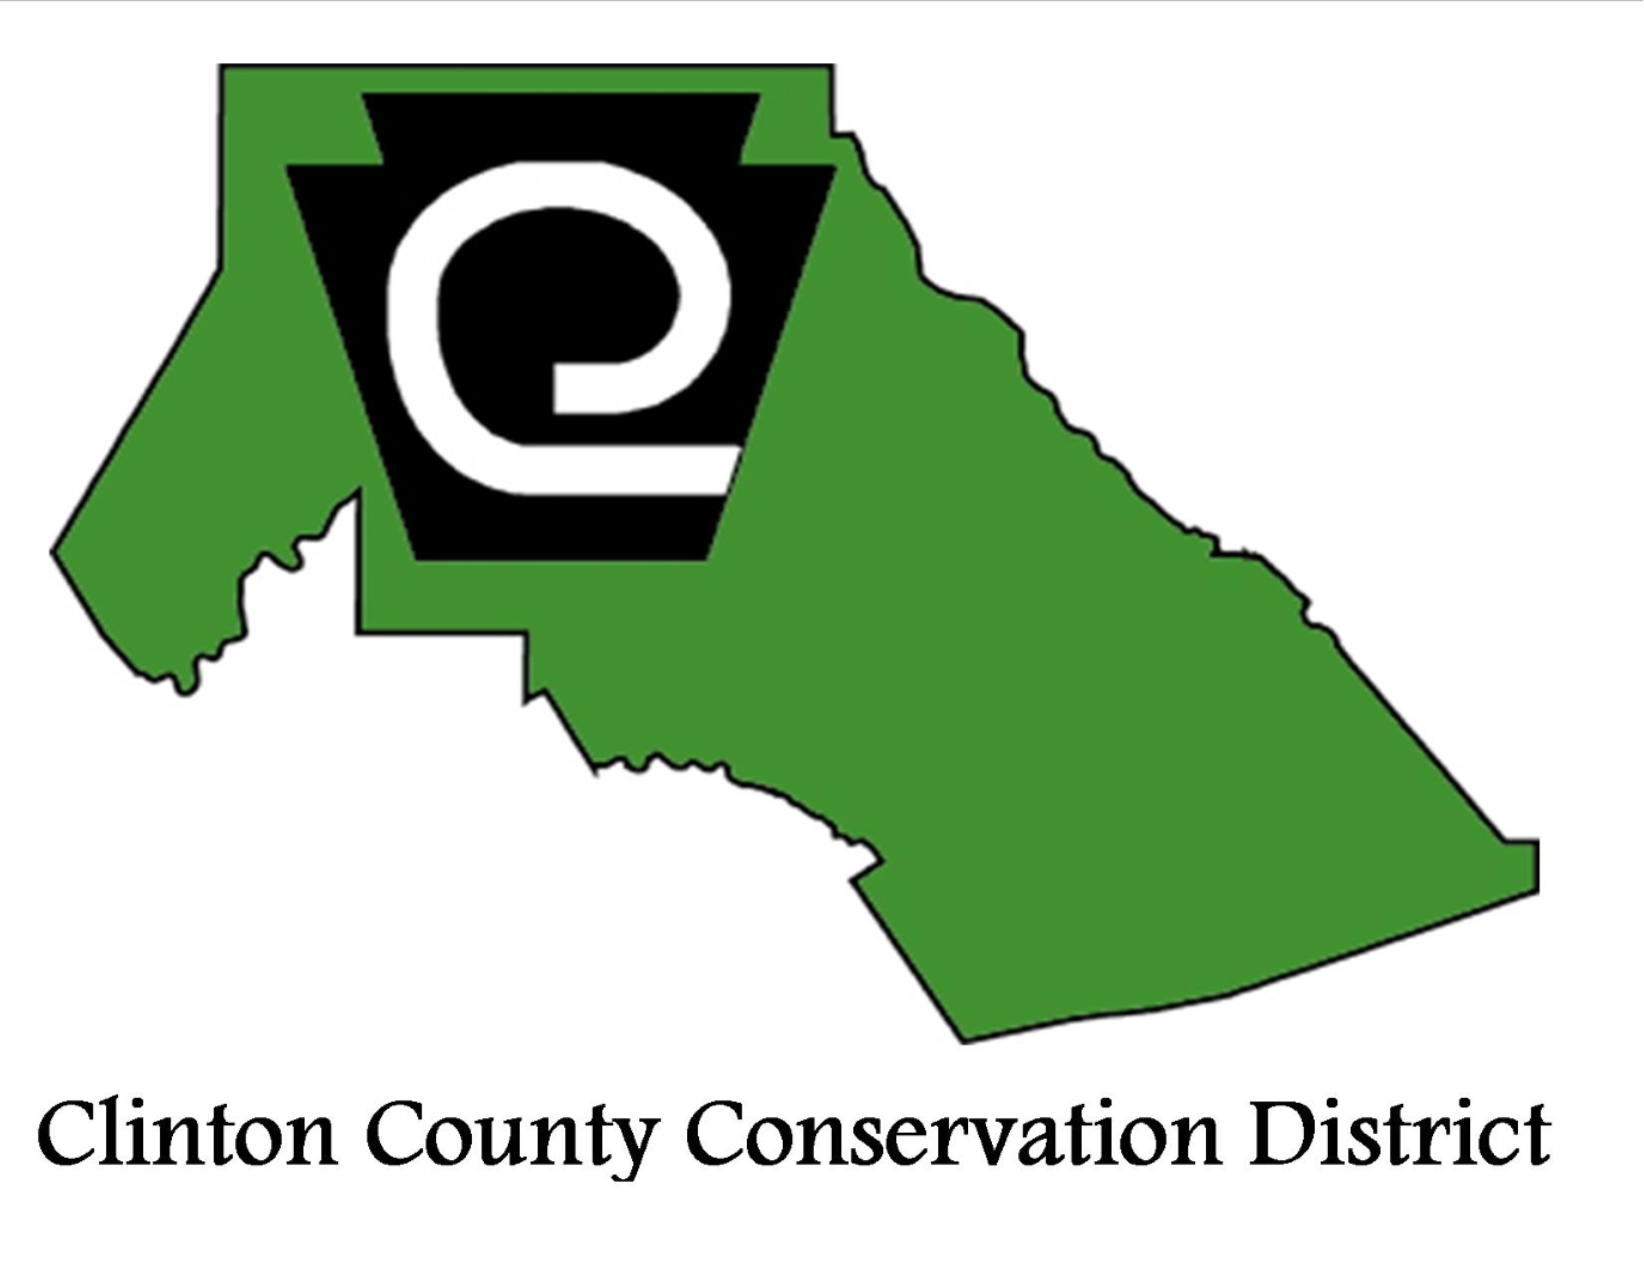 Clinton COunty COnservation District